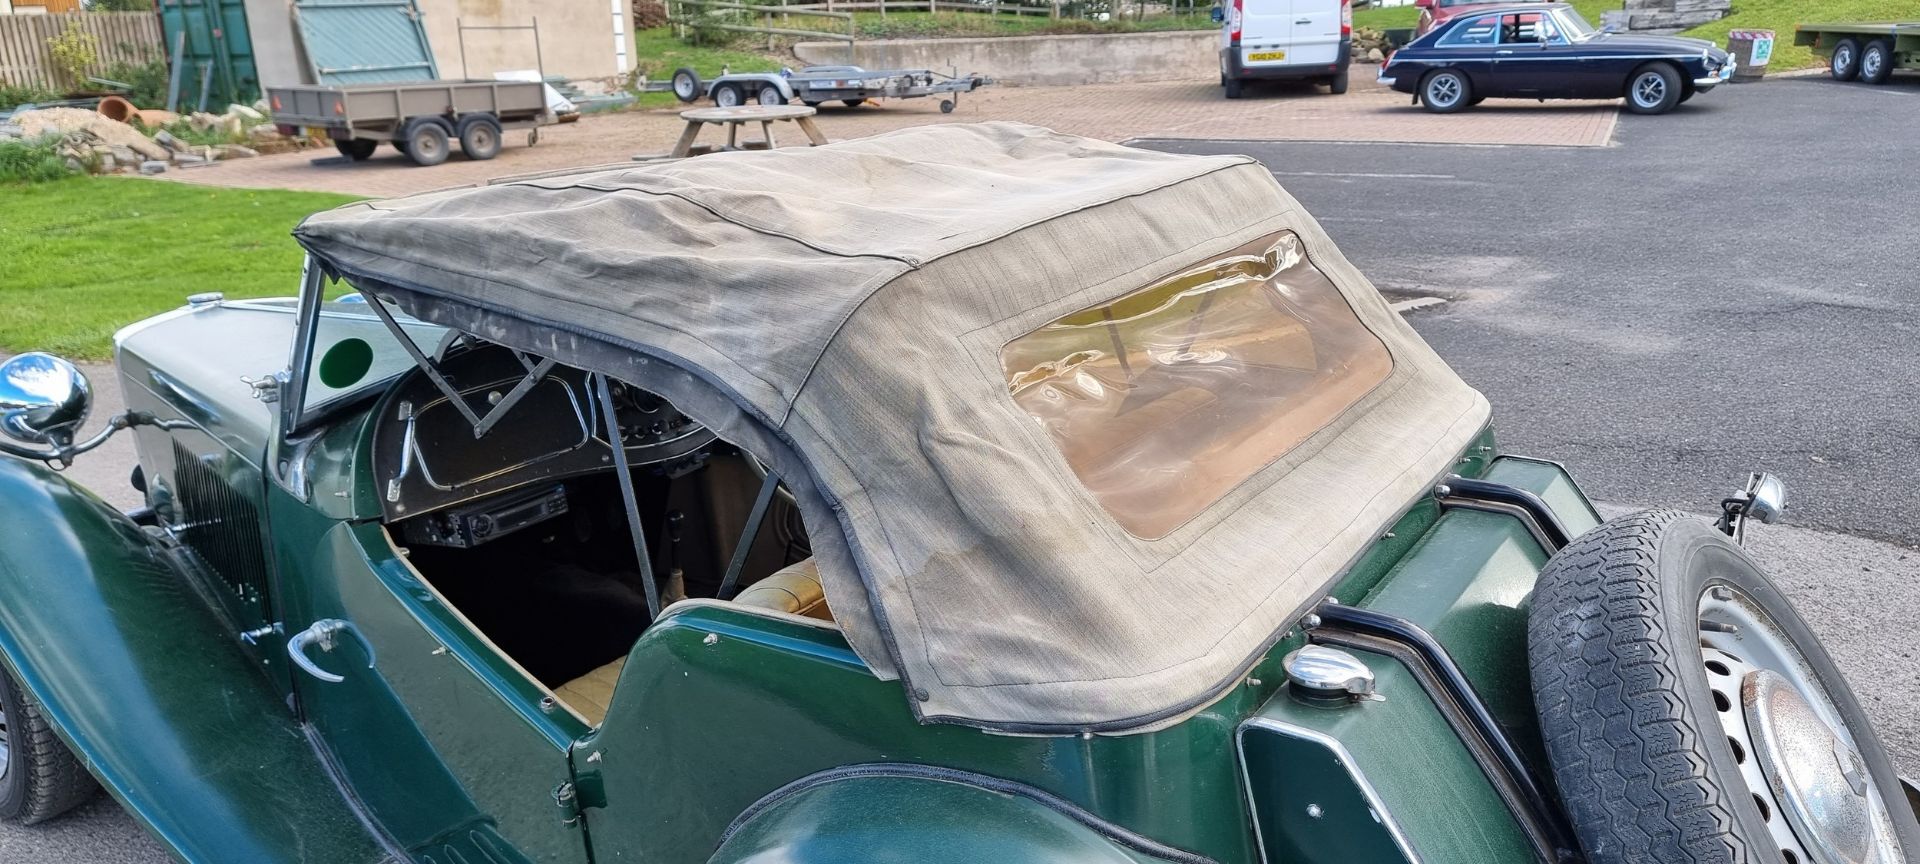 1952 MG TD, 1250cc. Registration number LTG 697. Chassis number TD 126630. Body Type 22381 Body - Image 18 of 20